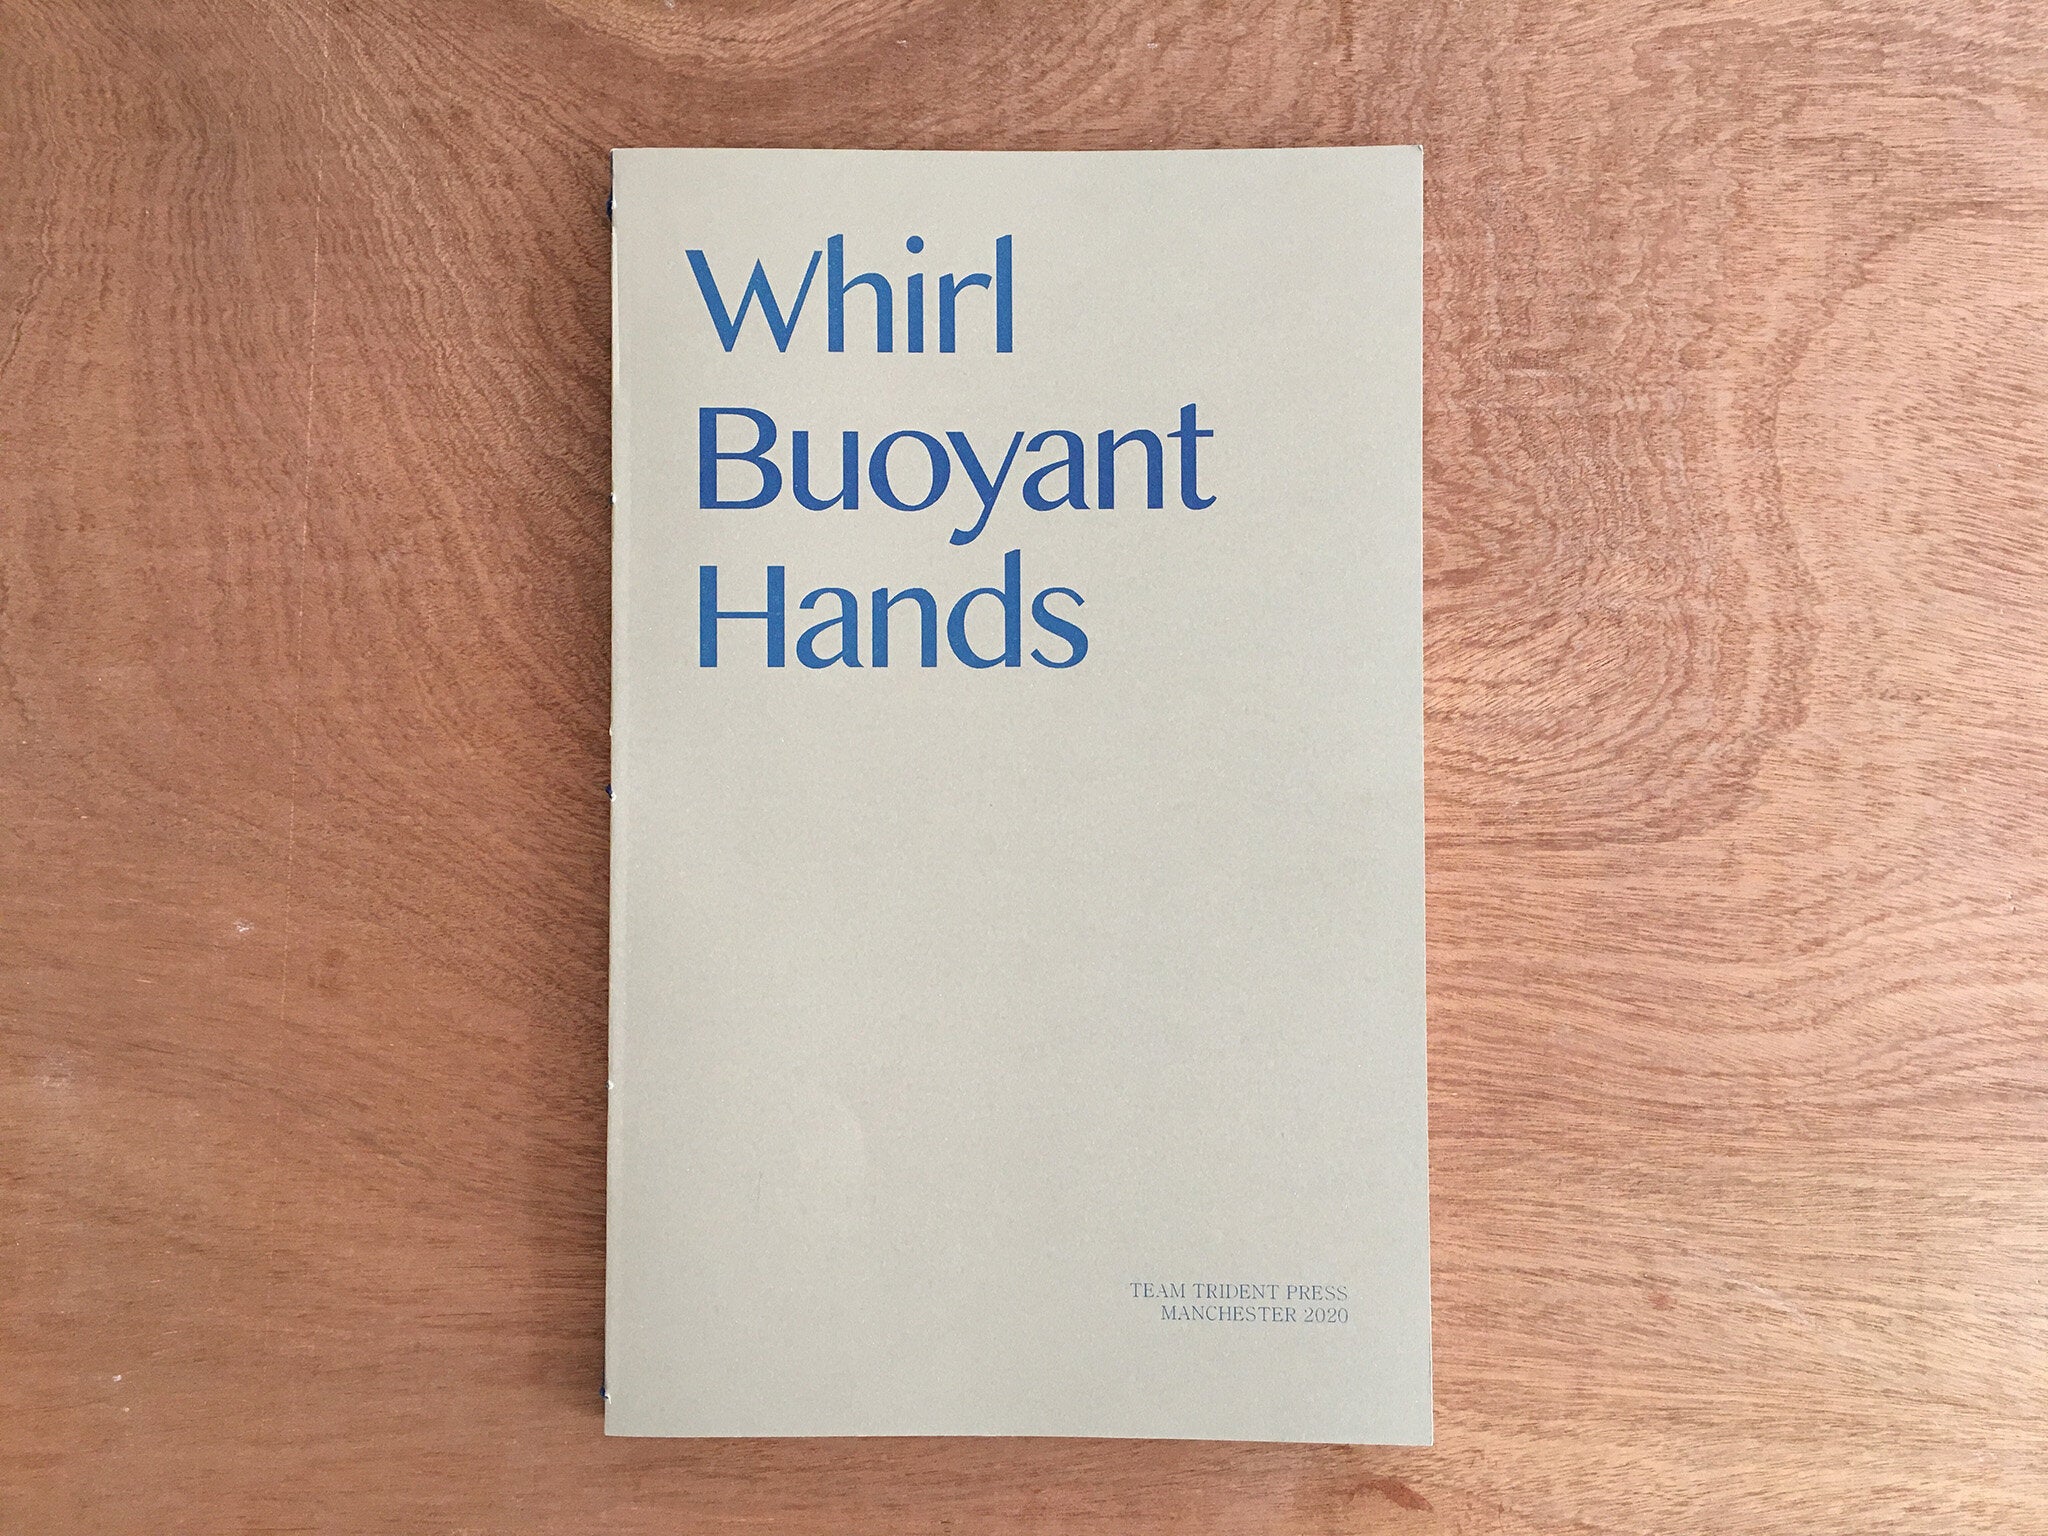 WHIRL BUOYANT HANDS by Various Artists